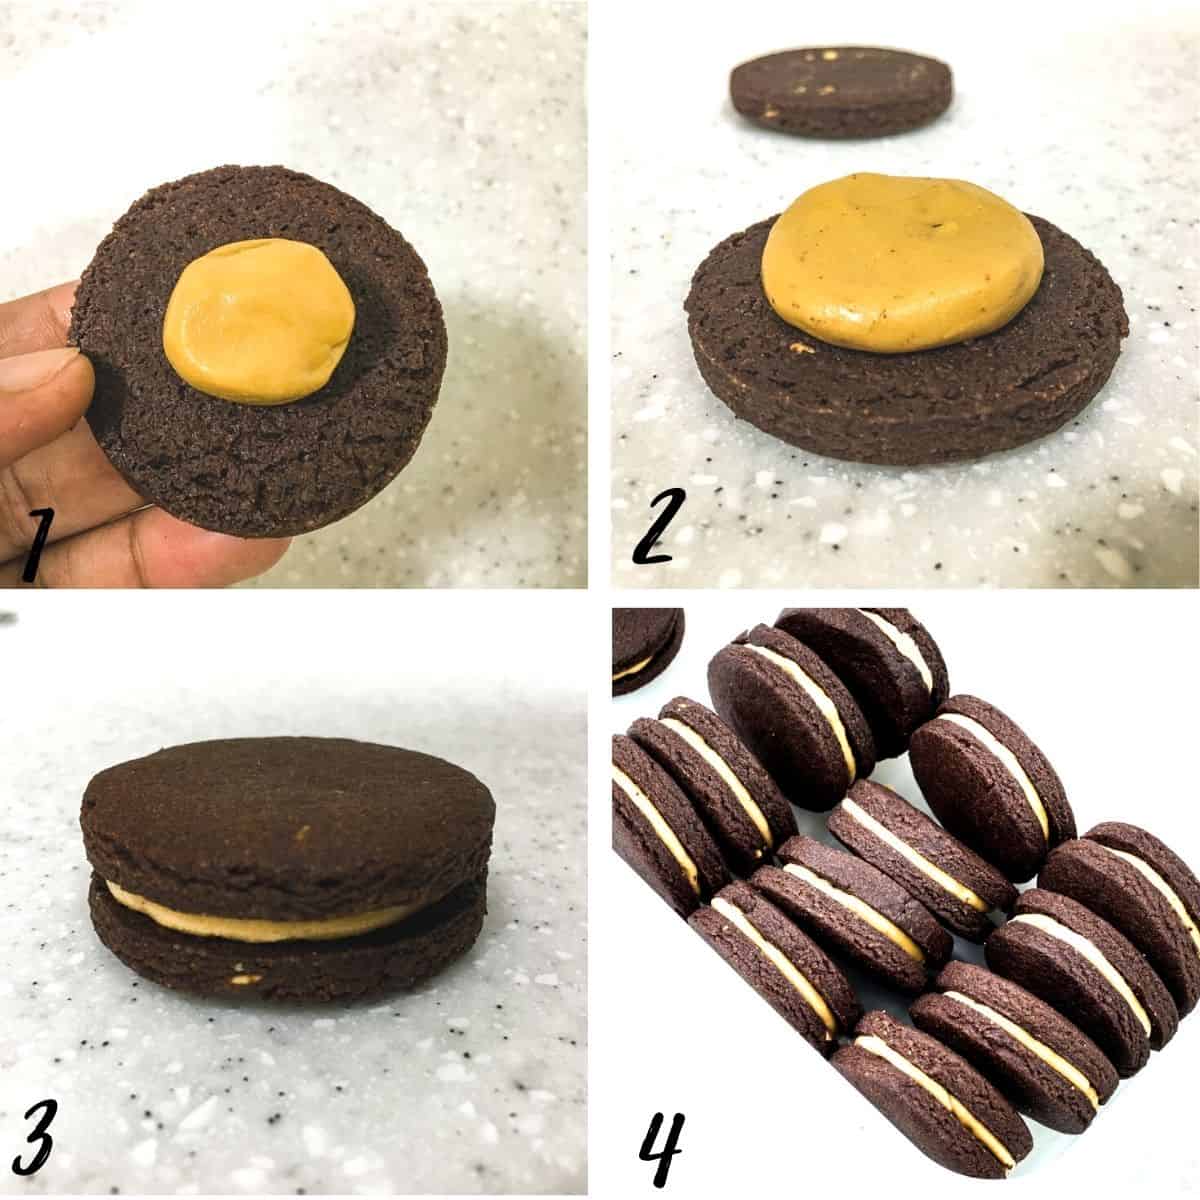 A poster of 4 images showing how to assemble chocolate sandwich cookies.